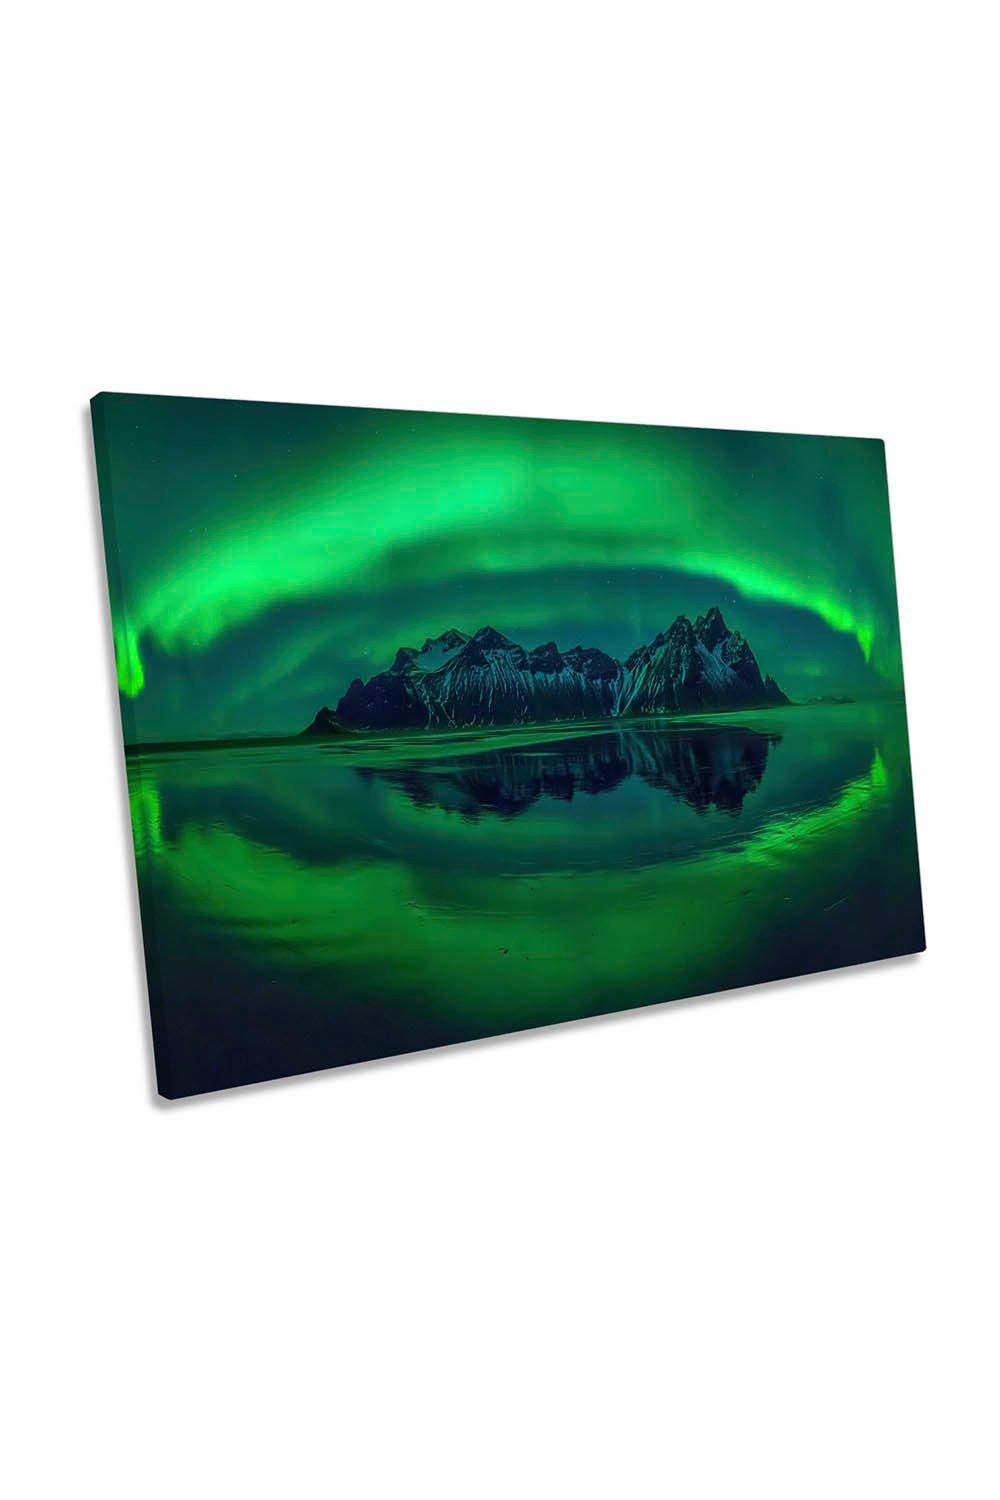 Eye of Stokksness Green Northern Lights Canvas Wall Art Picture Print